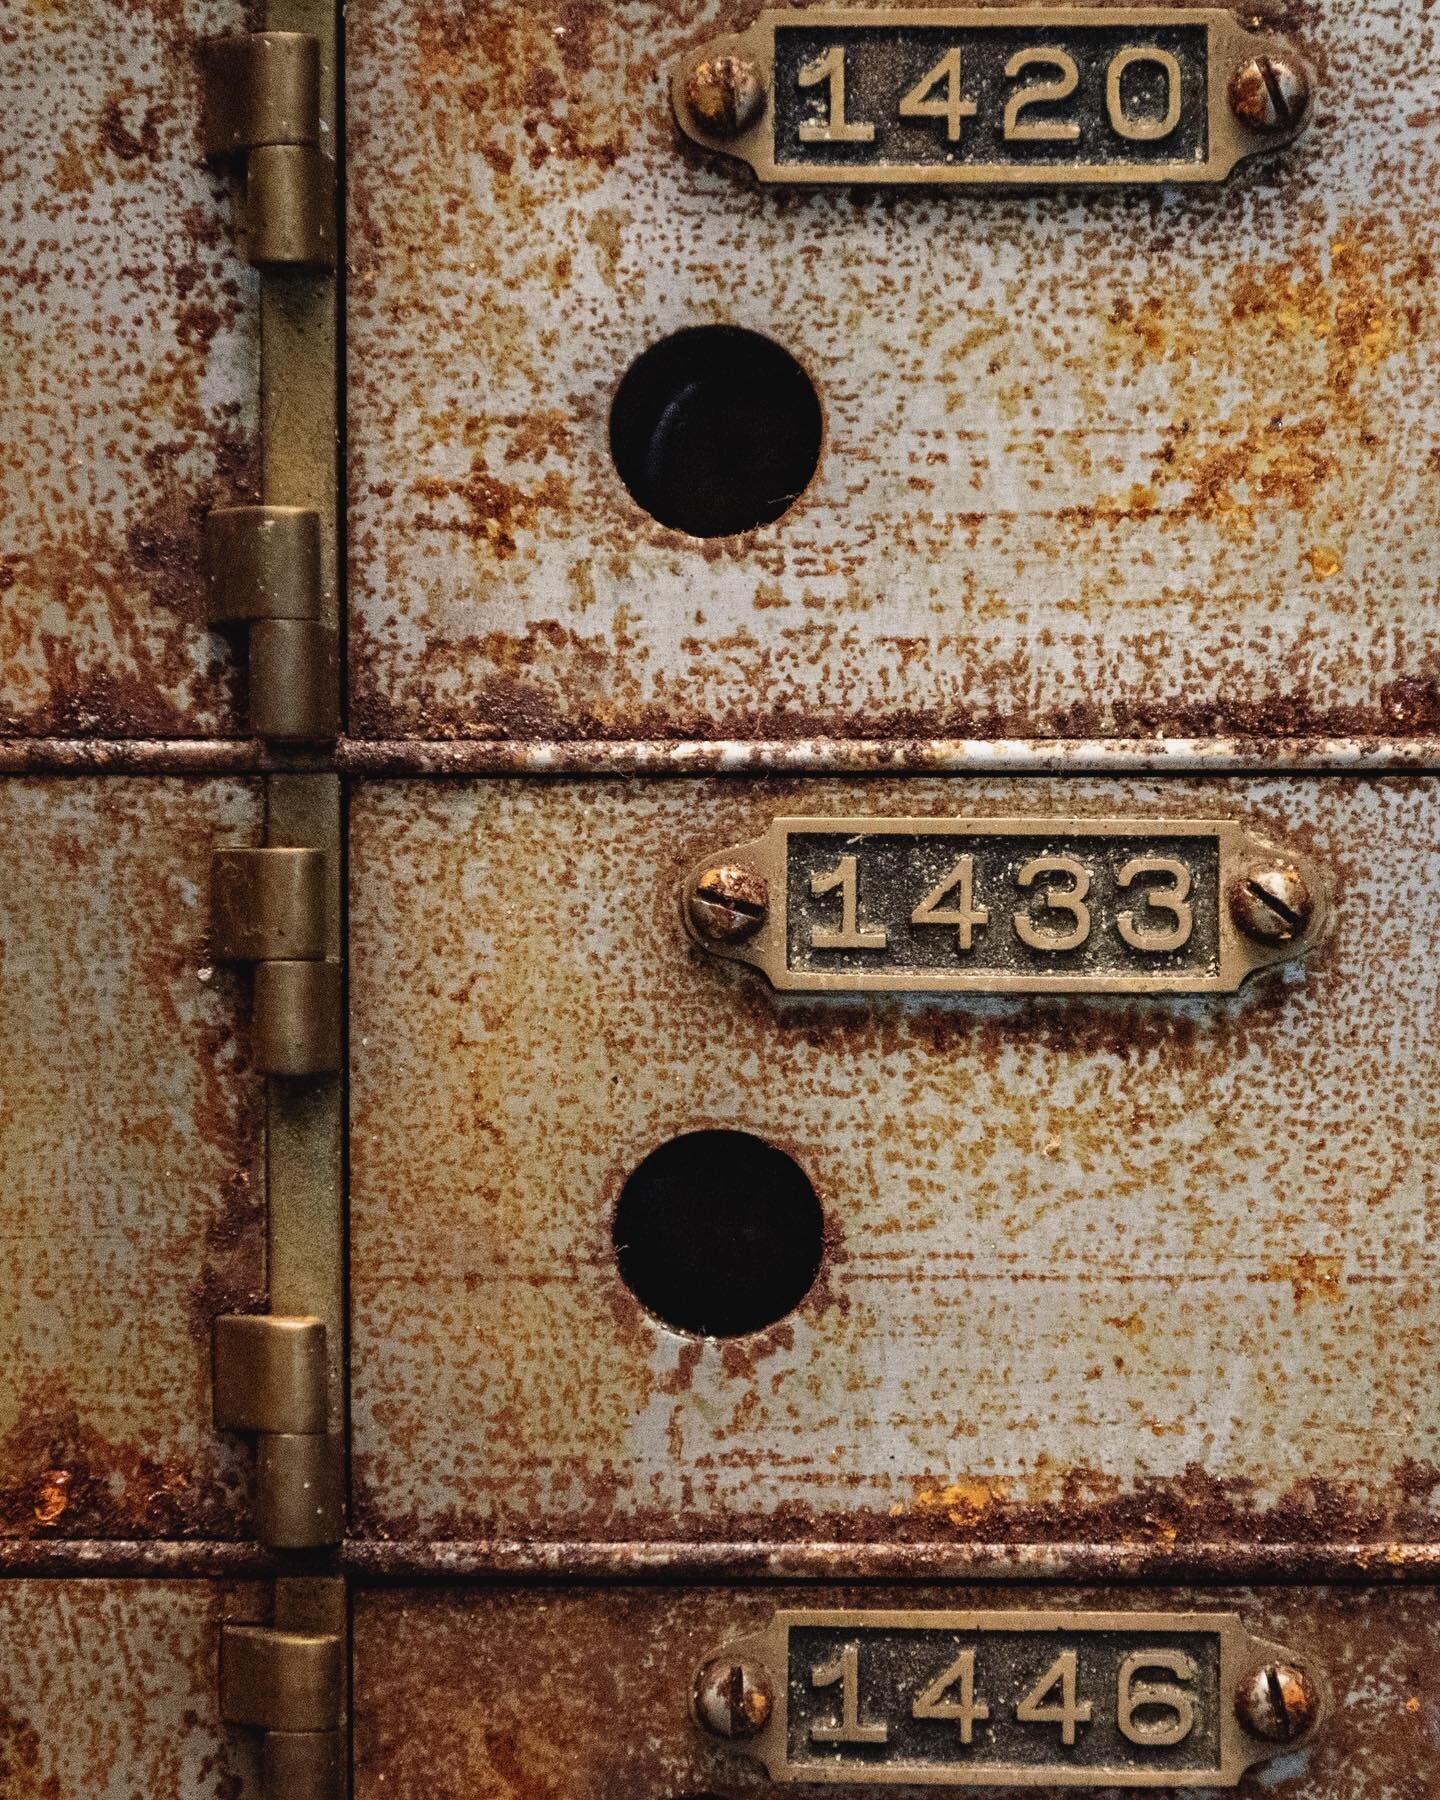 These hinges and number plates though... the coolest repurposed bank vaults that I&rsquo;ve seen are the Vitamin Vault in Chicago&rsquo;s Fancy Walgreens and @torel1884 + @bartolomeu_bistro&rsquo;s wine tasting room. What are some others you&rsquo;ve